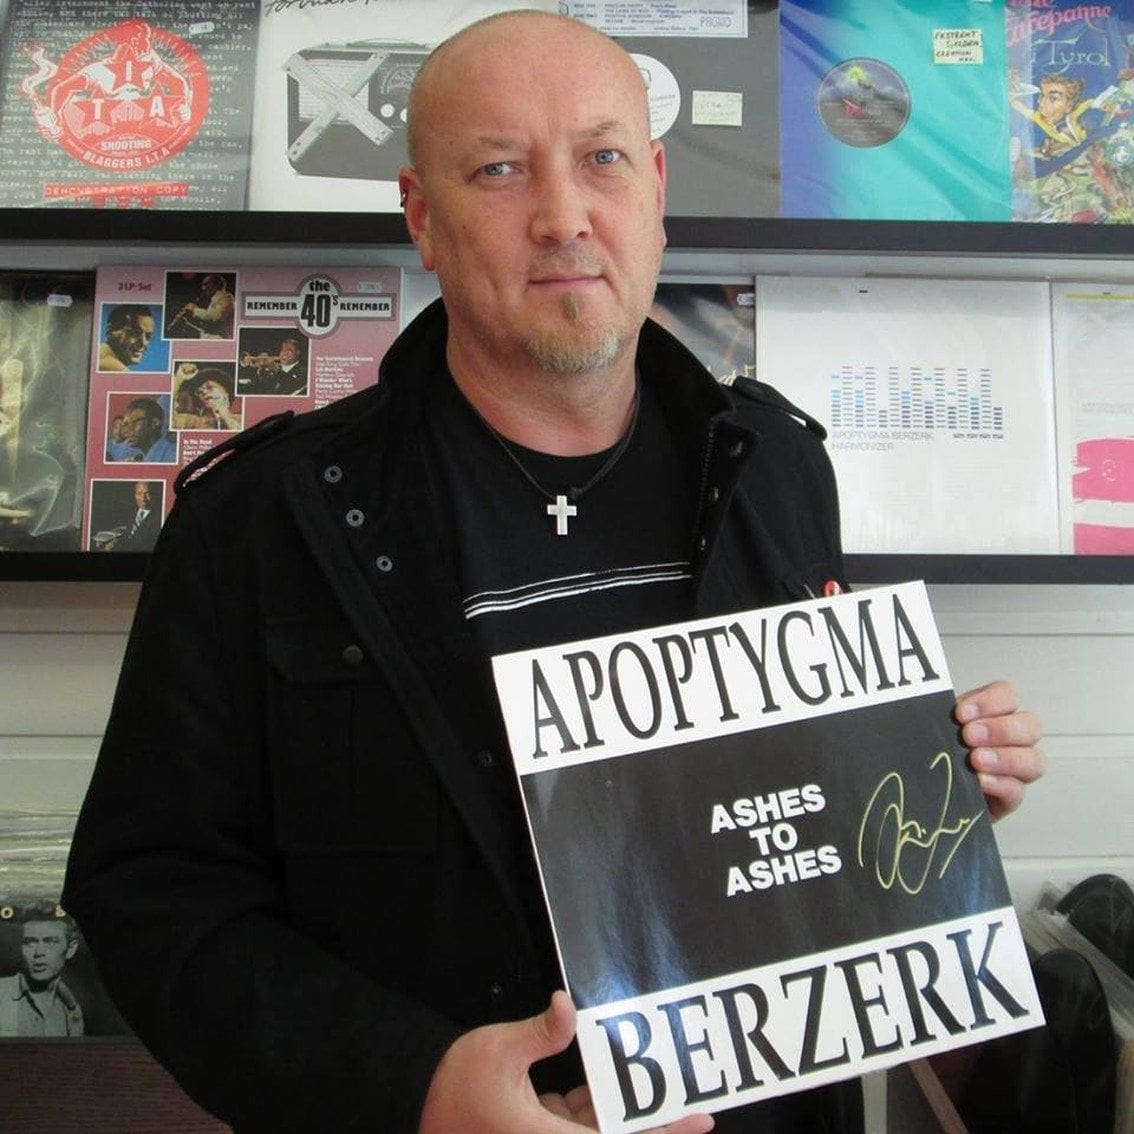 25 years ago Apoptygma Berzerk released the 'Ashes To Ashes' 12 inch - a milestone in EBM land